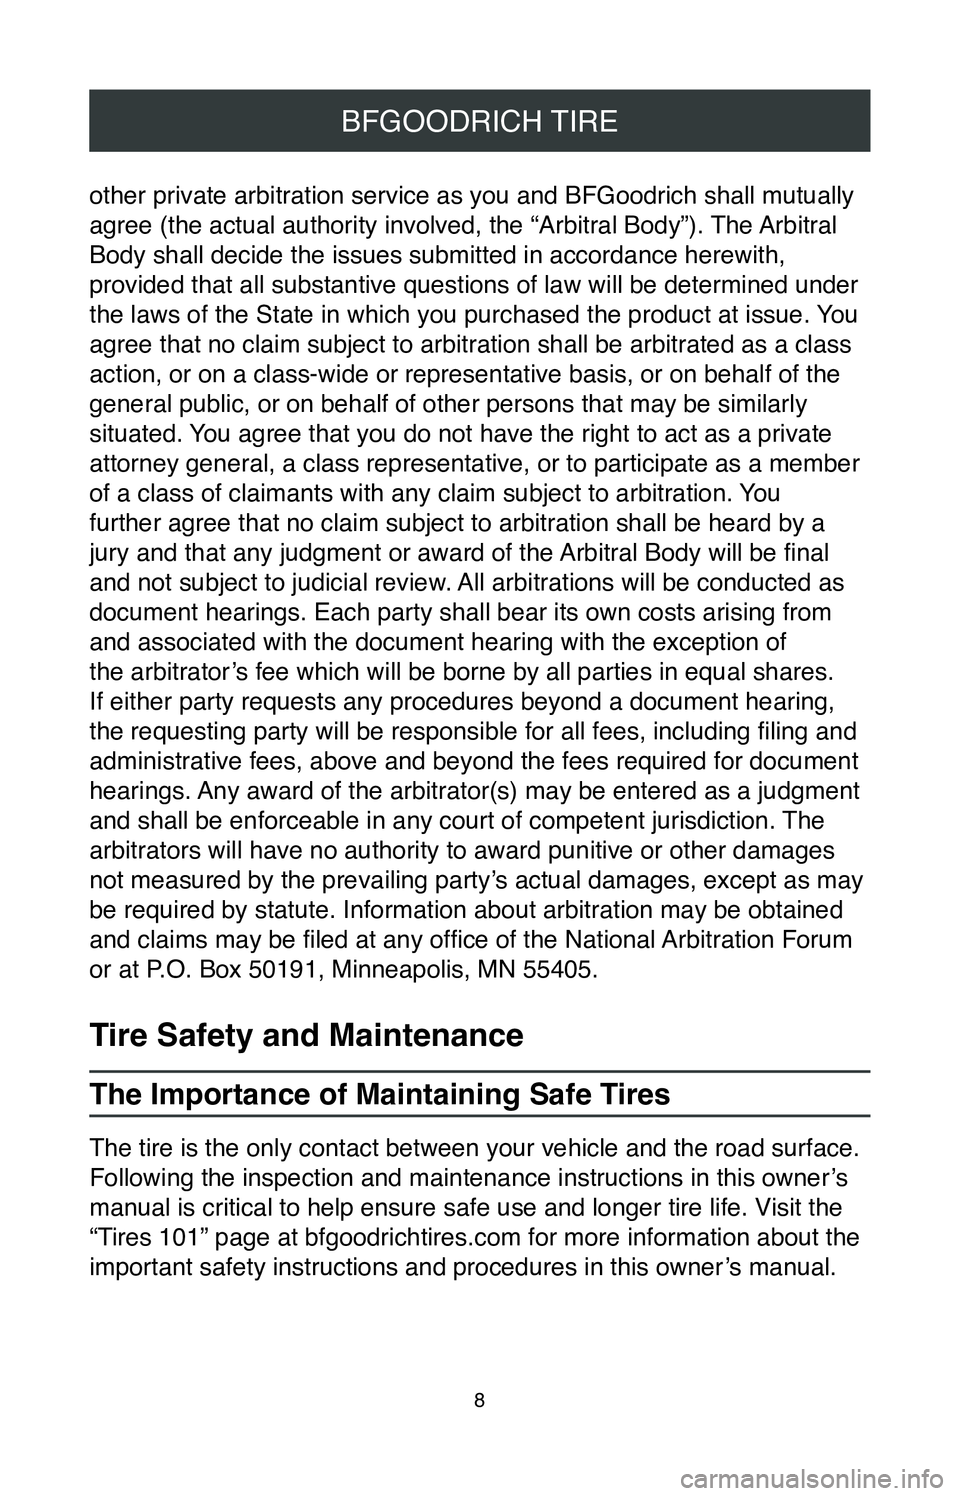 TOYOTA AVALON 2020  Warranties & Maintenance Guides (in English) 8
BFGOODRICH TIRE
other private arbitration service as you and BFGoodrich shall mutually 
agree (the actual authority involved, the “Arbitral Body”). The Arbitral 
Body shall decide the issues sub